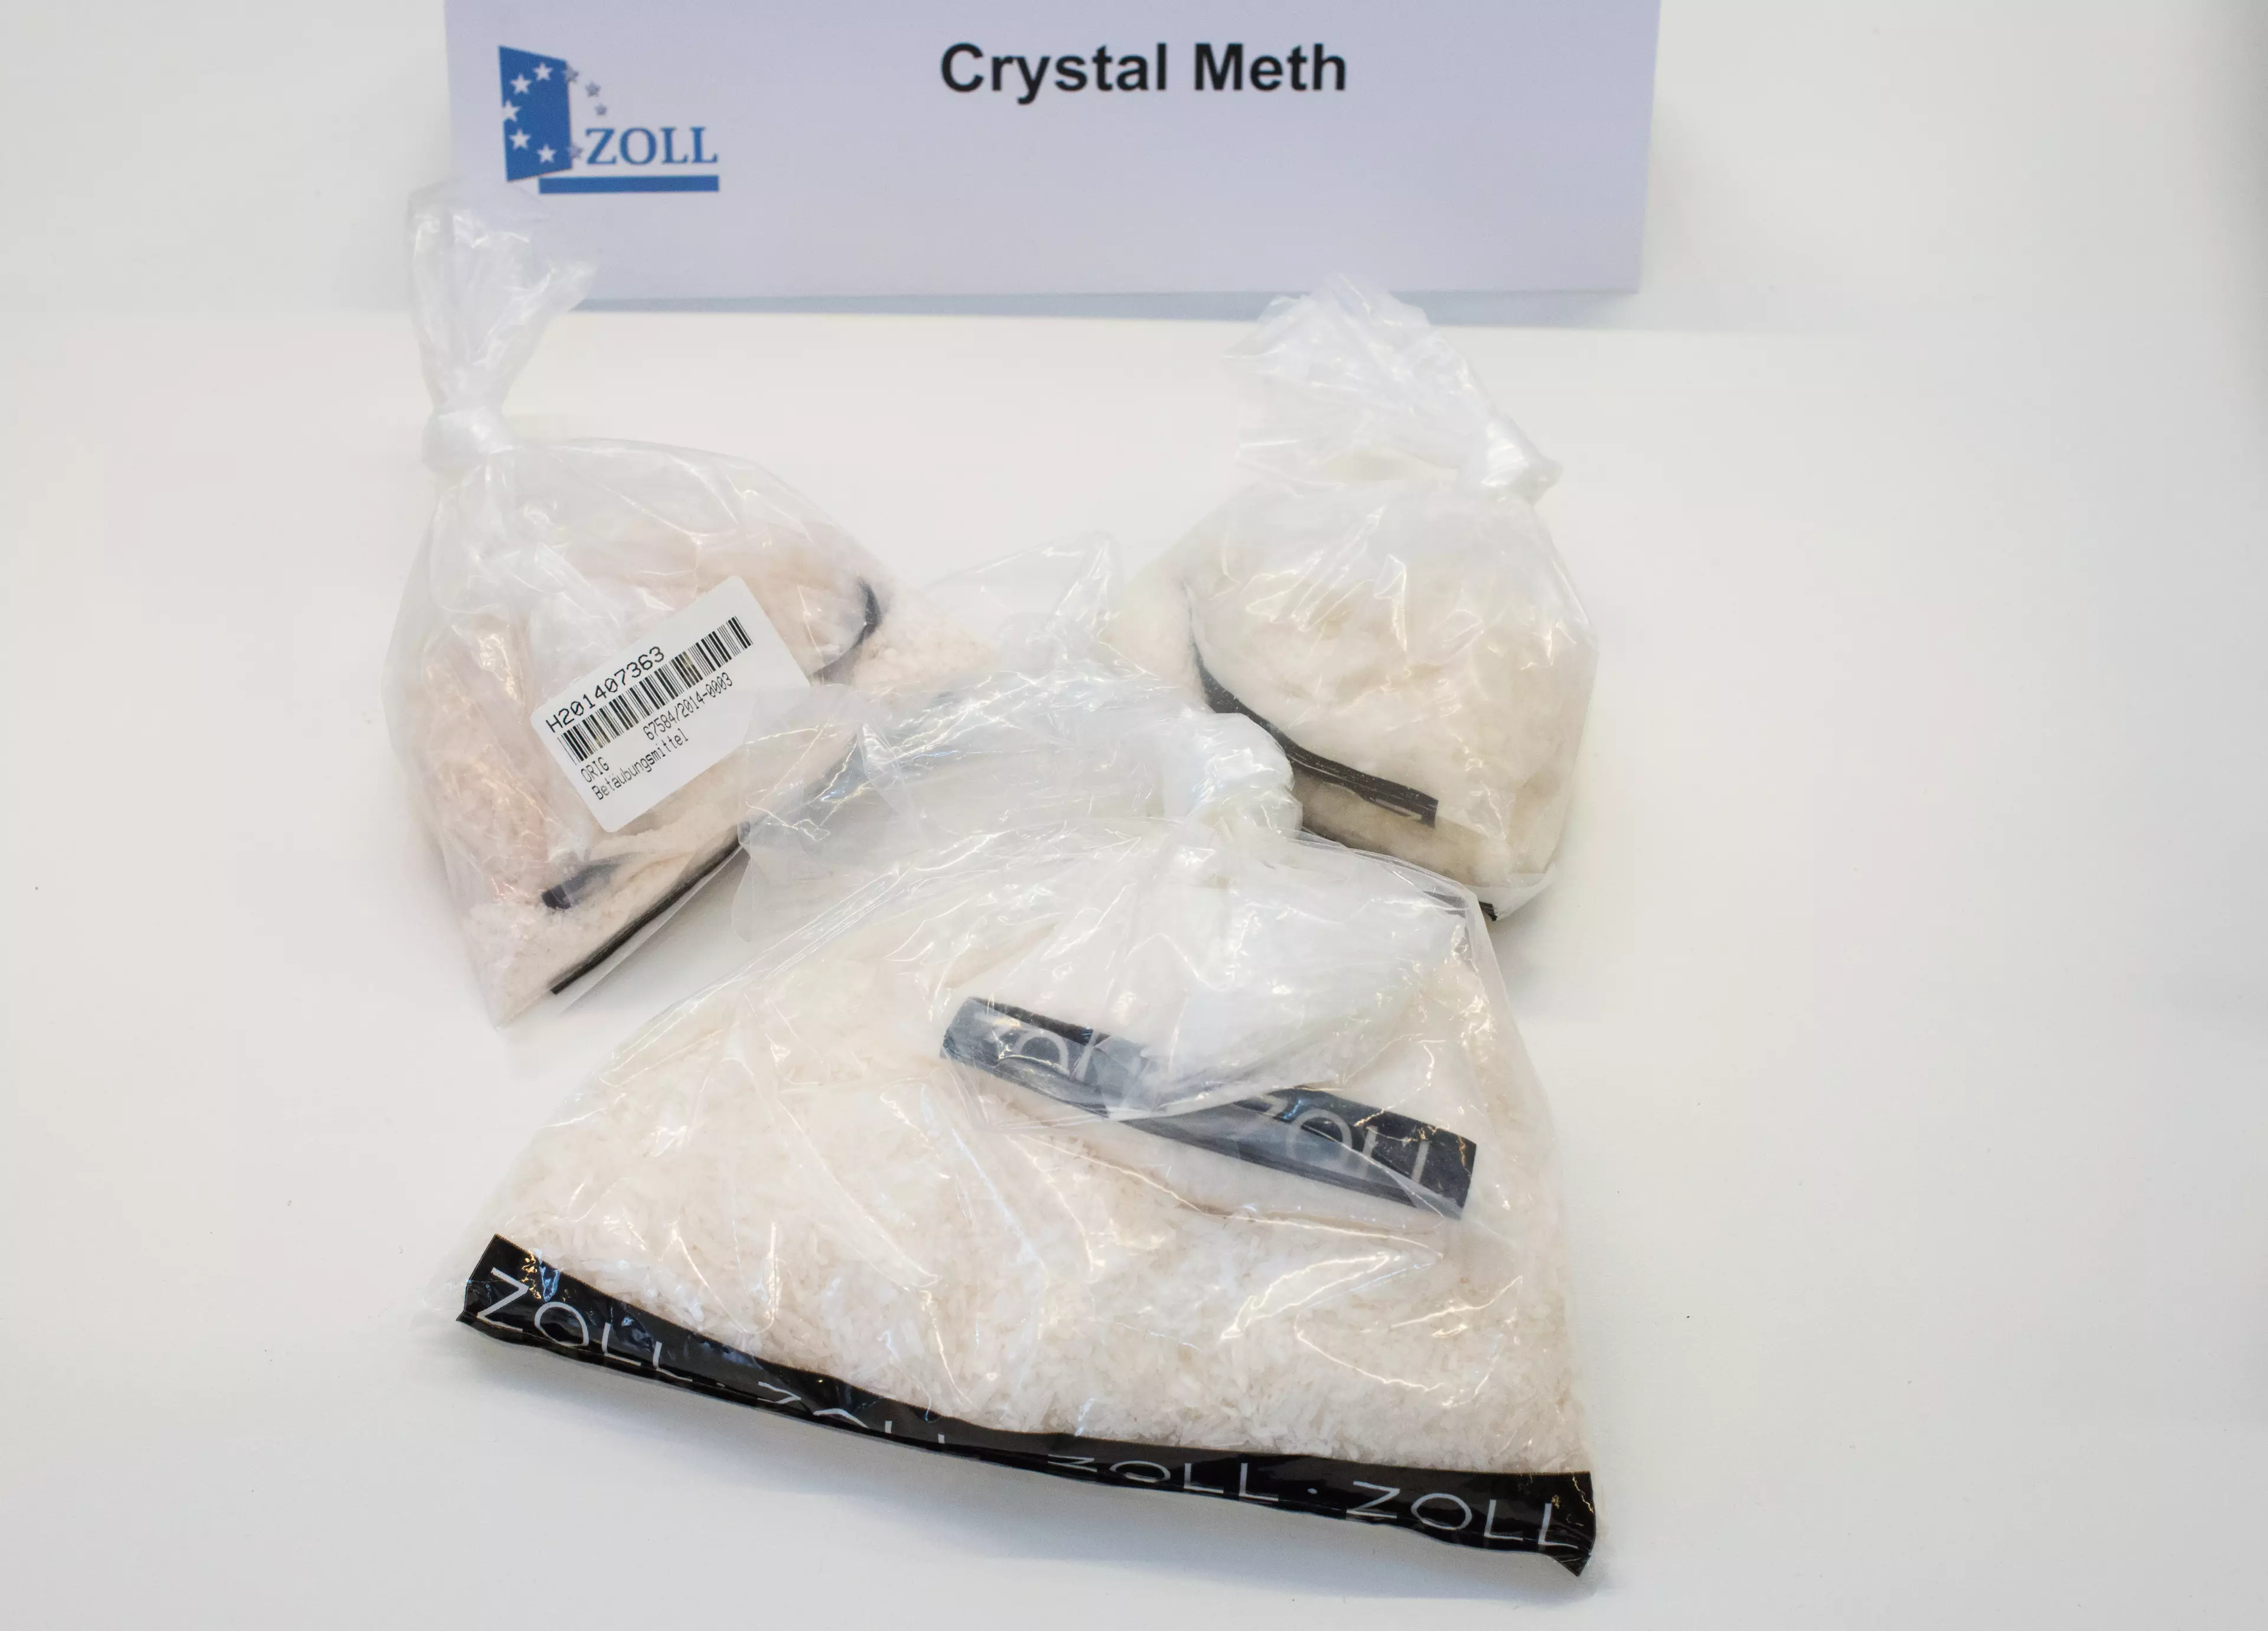 The meth addict pretended to be police in order to carry out a drug raid.